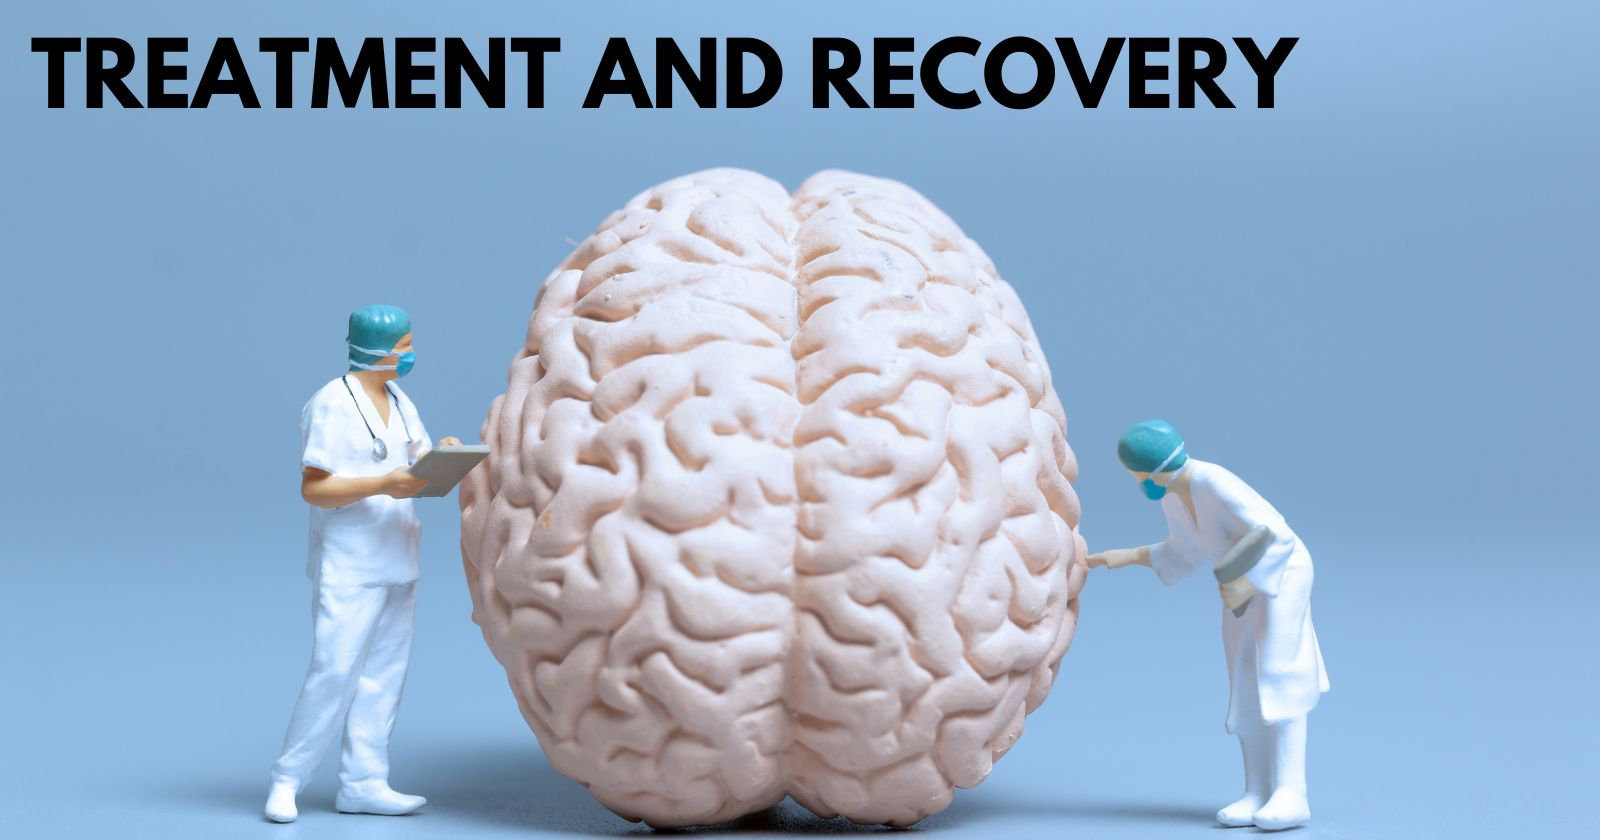 Treatment and Recovery

Big size brain and 2 doctors checking it